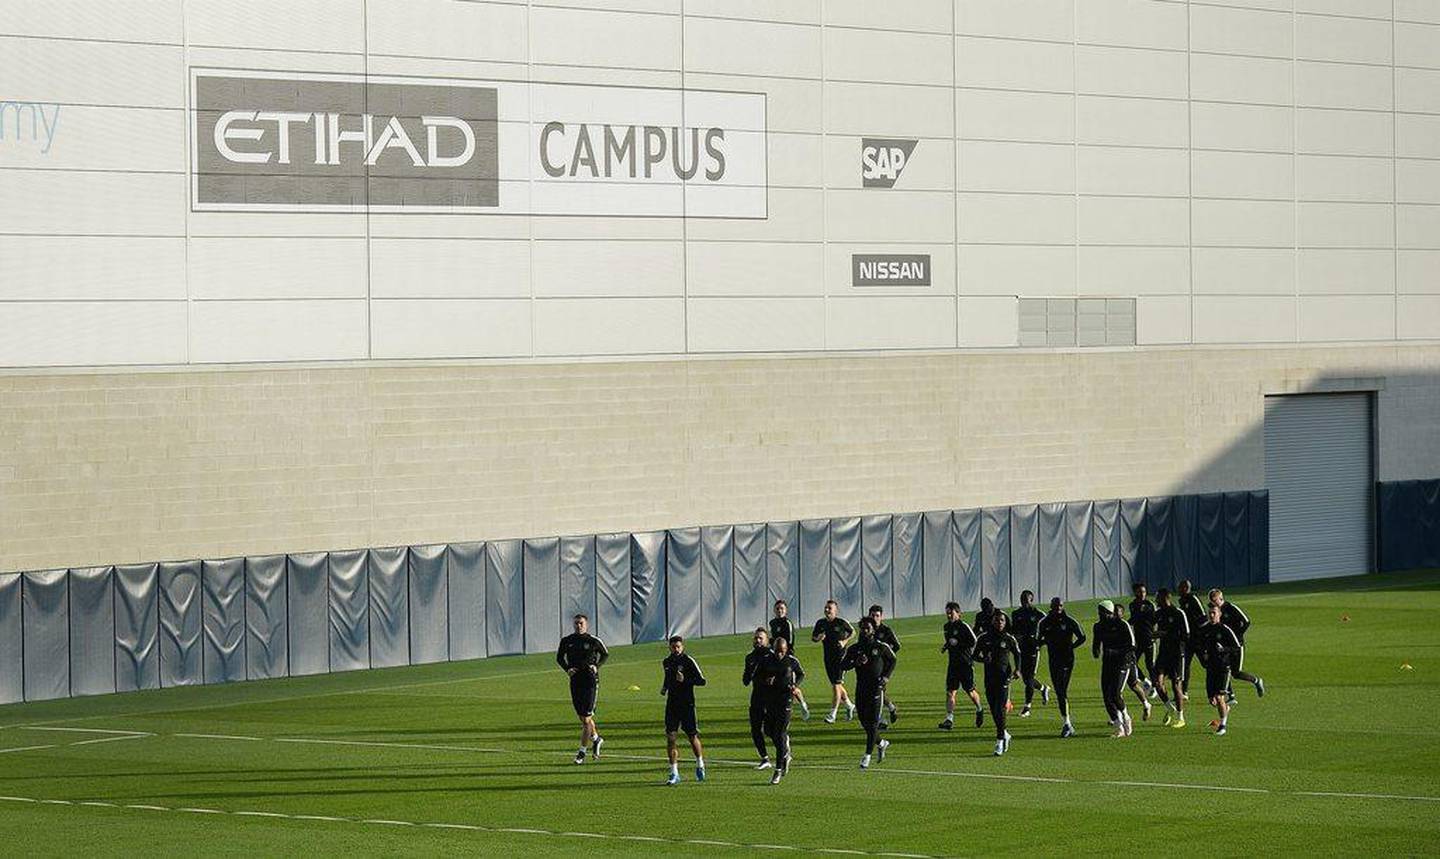 Manchester City players train on Monday at the team’s Etihad Campus in Manchester ahead of a Champions League match on Tuesday. Peter Powell / EPA